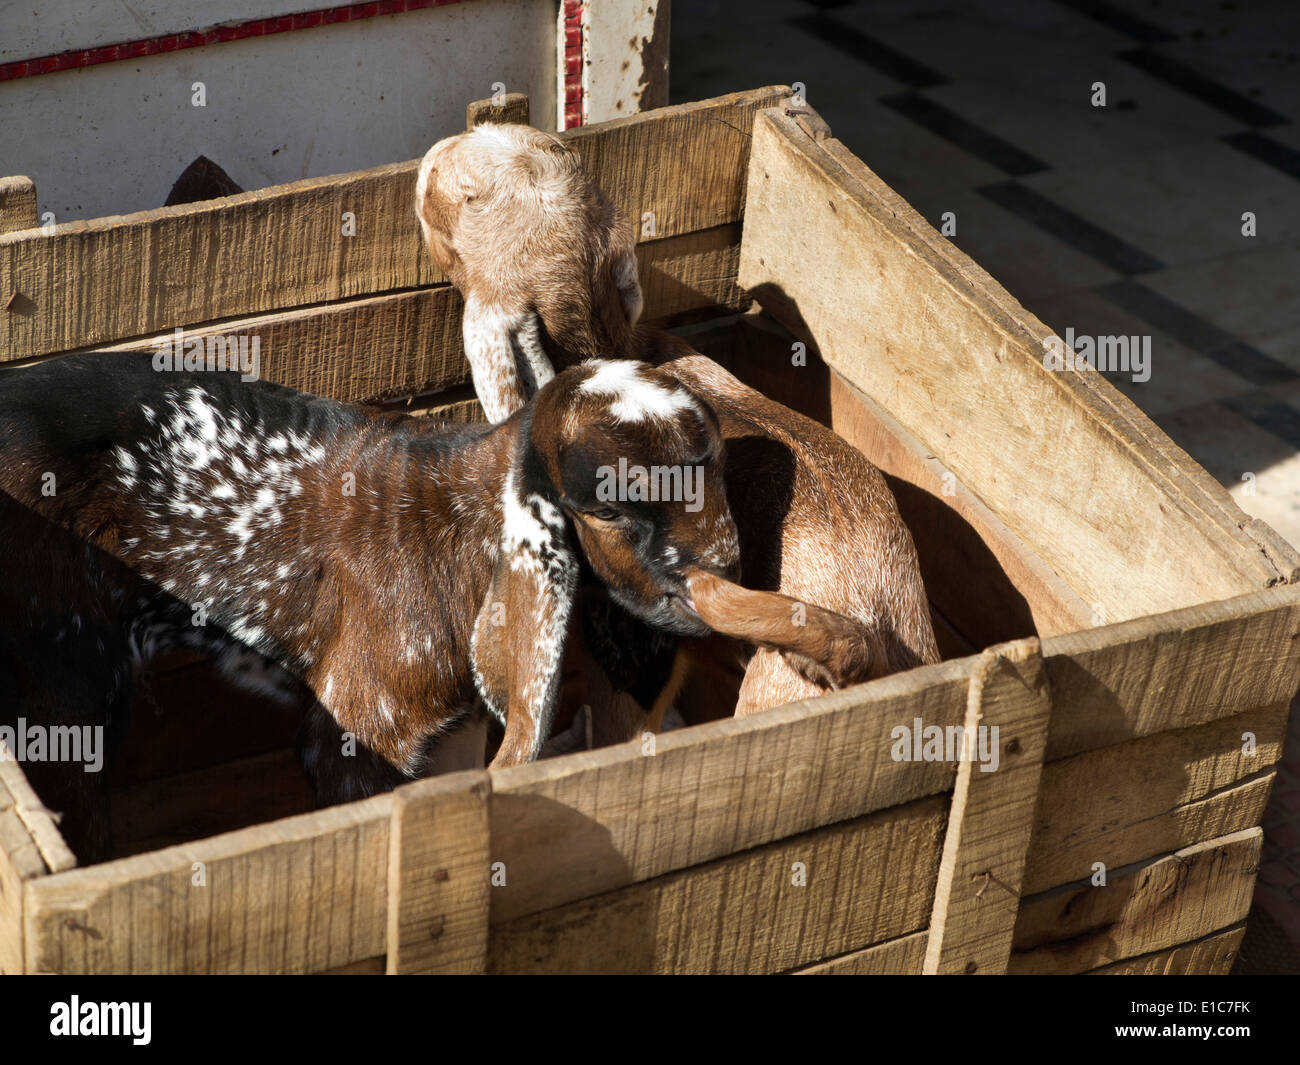 India, Rajasthan, Jodhpur, animal welfare, two goats contained in wooden box Stock Photo